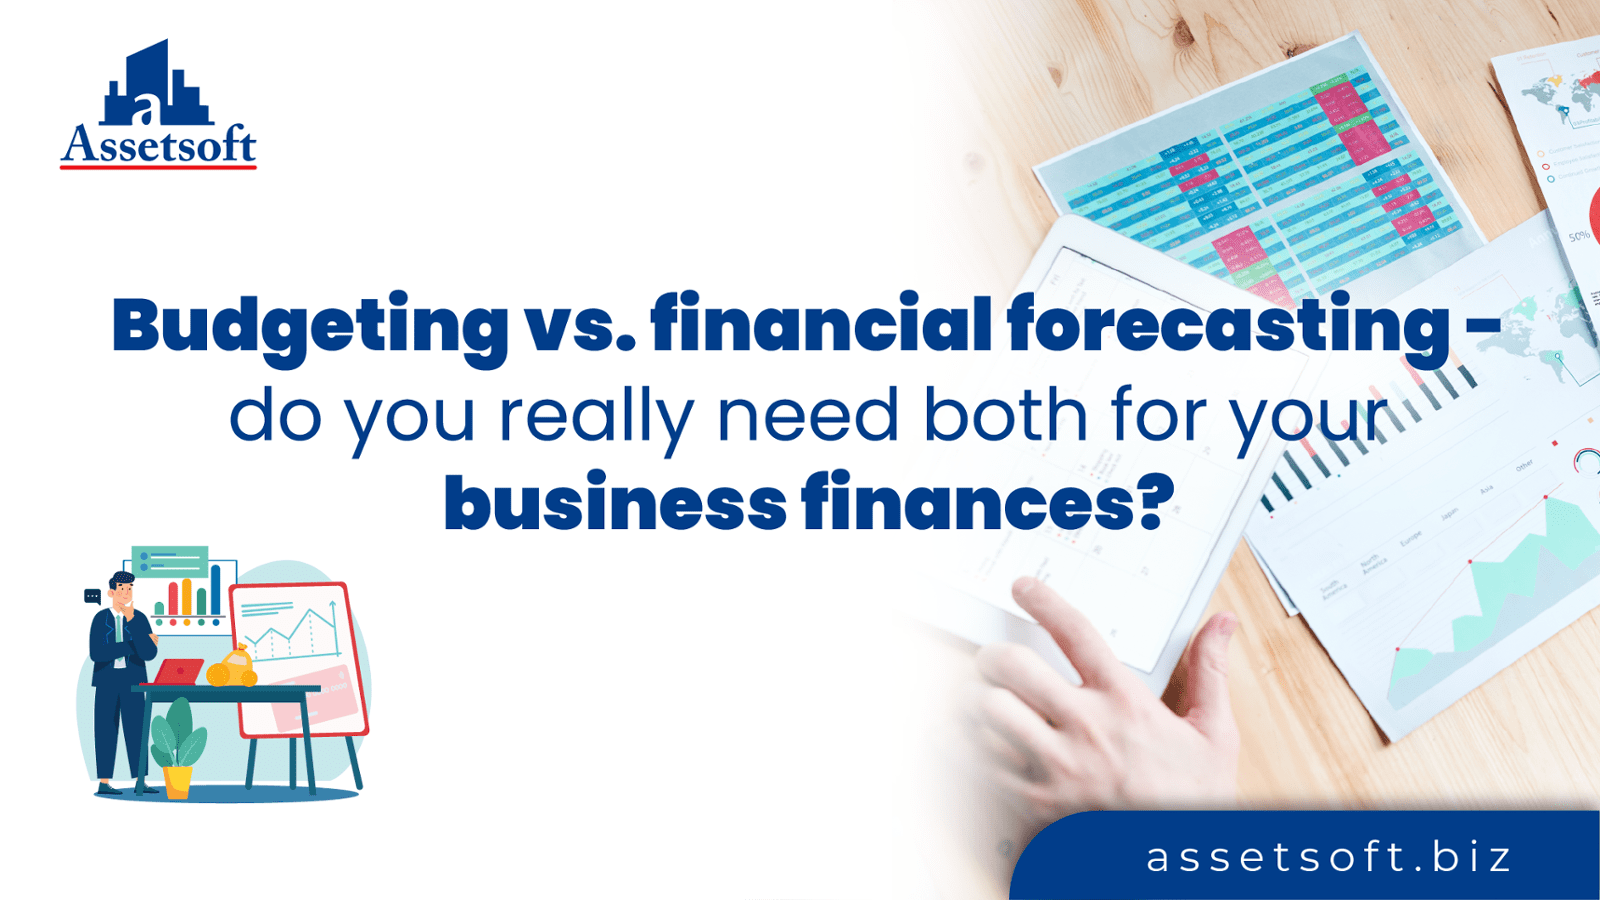 Budgeting vs. financial forecasting - Why Do You need both for your business? 